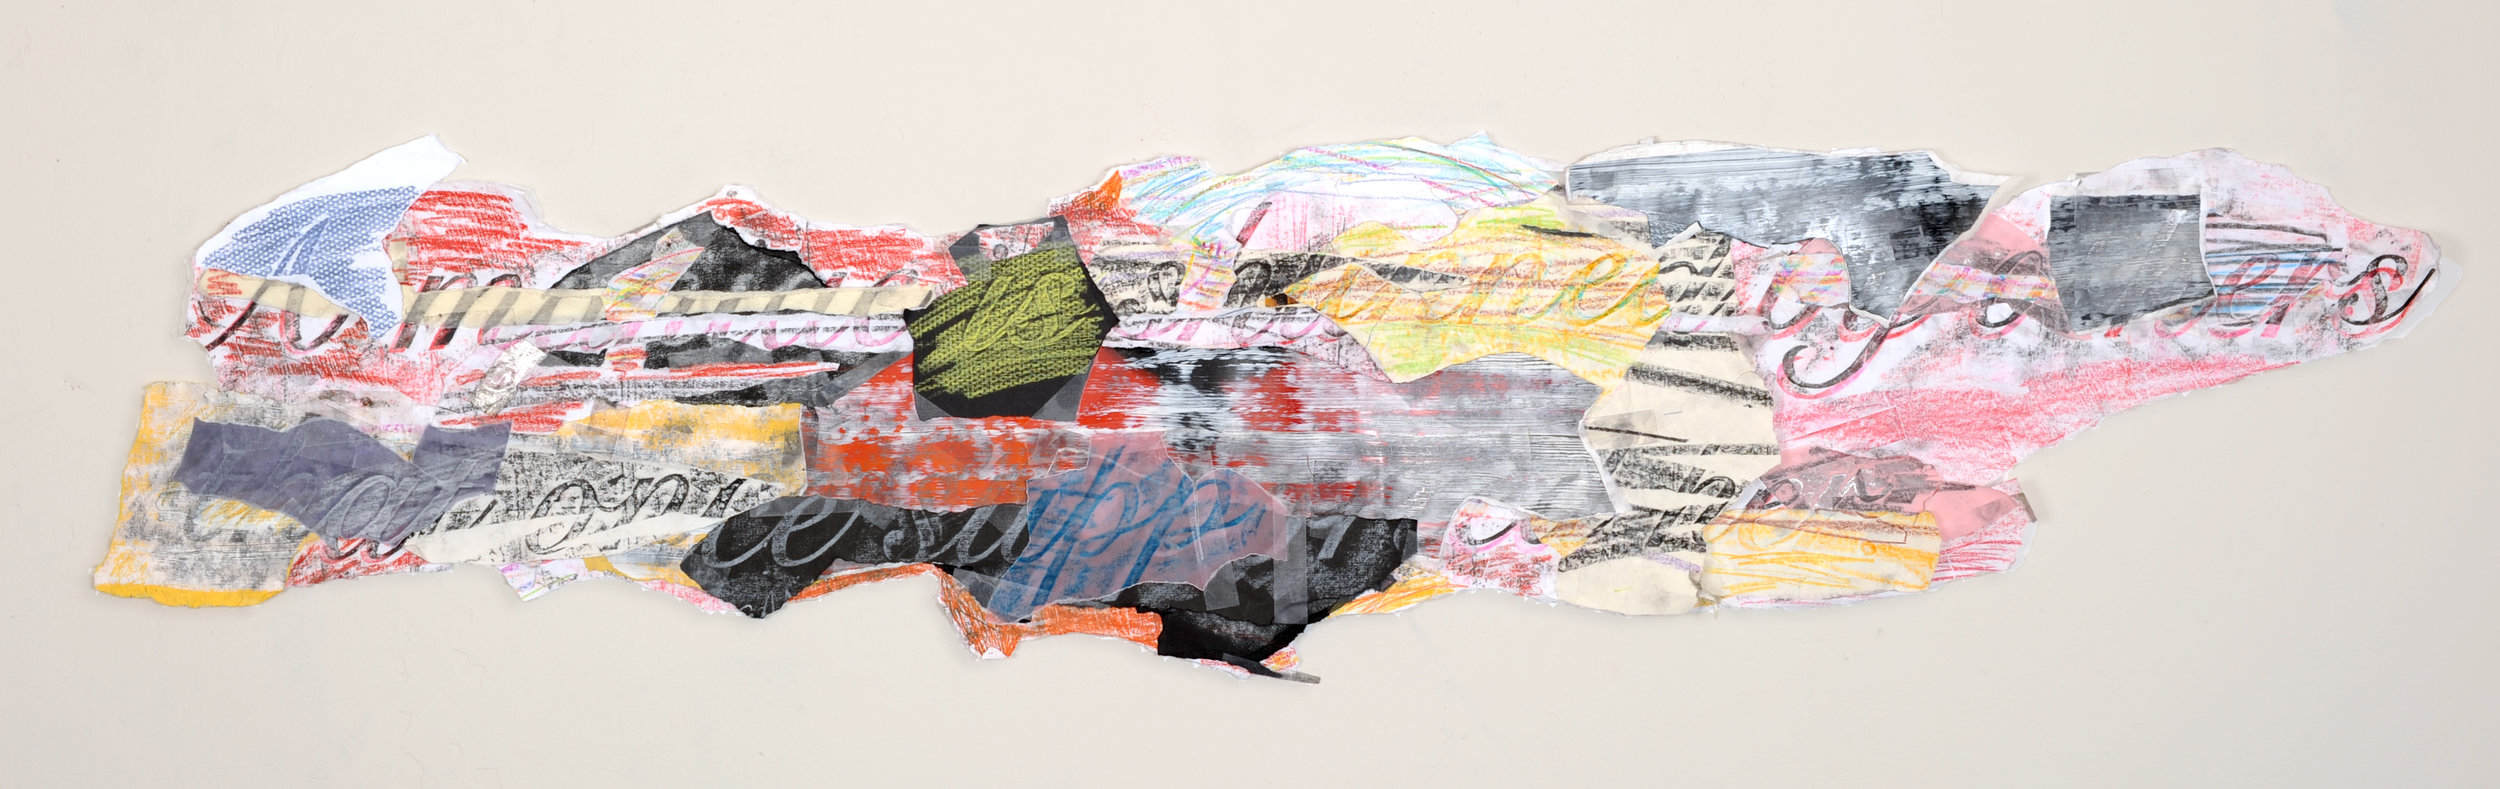   Synopsis #15 version 2 , 2009-11 Graphite, crayon, spray paint, photographs, paper, tape 12 x 58 inches 